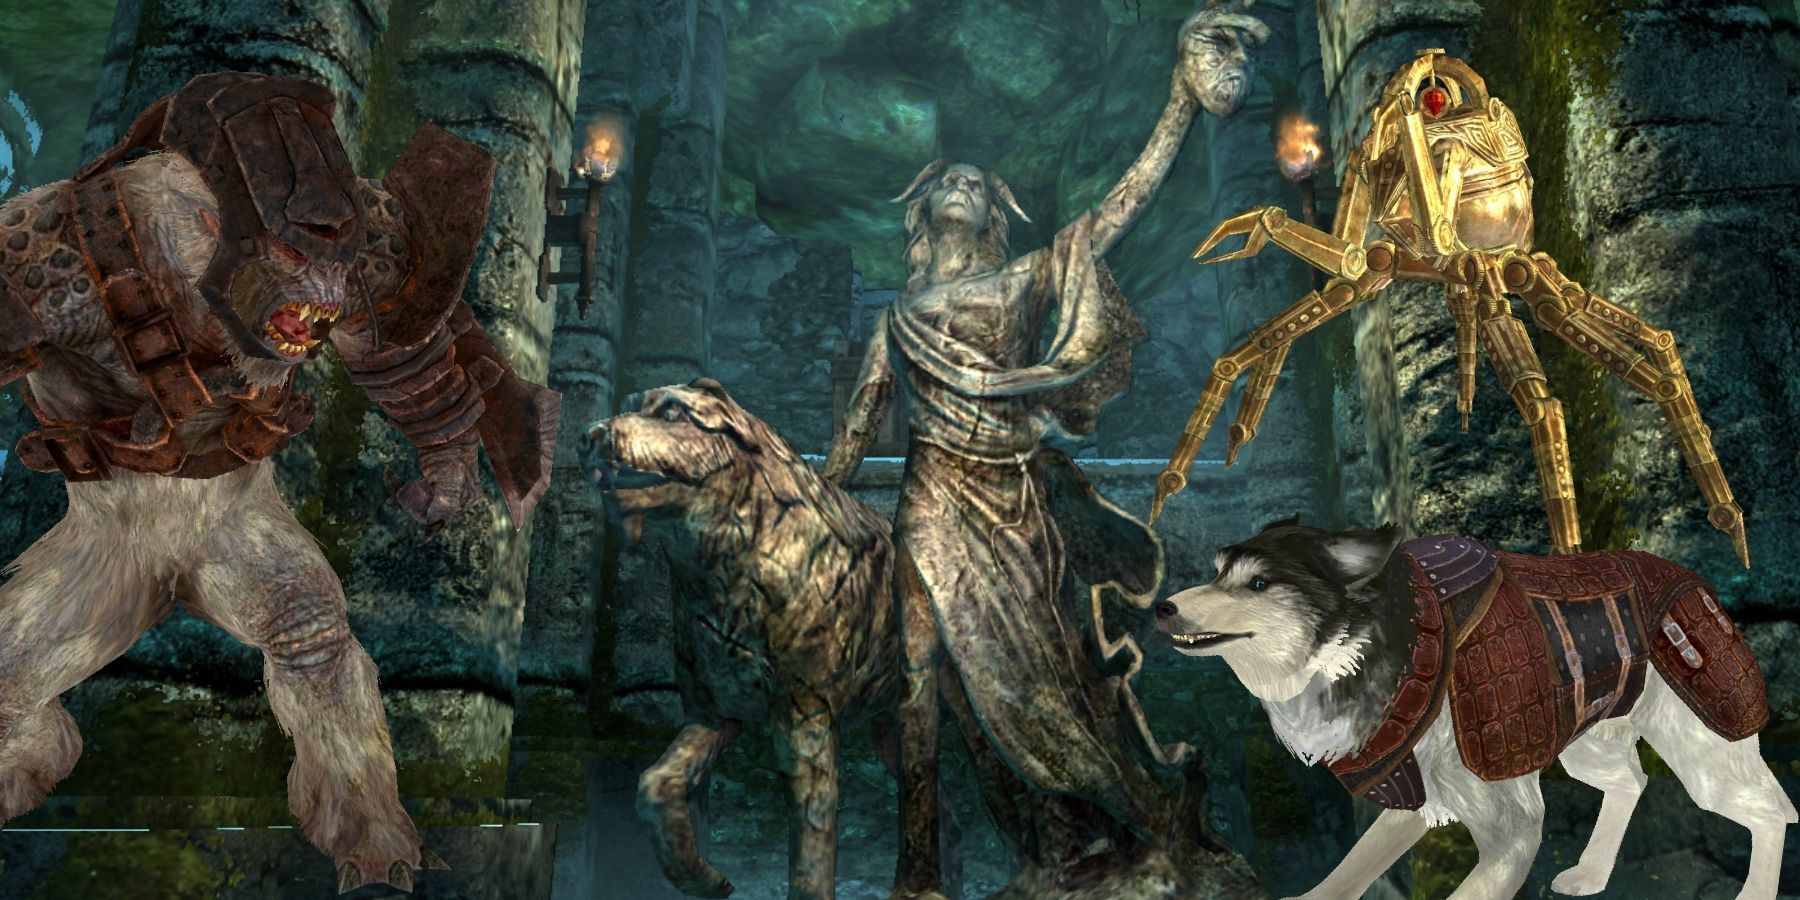 Skyrim Non-Human Followers Feature Image Barbas Armored Troll Bran And Steadfast Dwarven Spider